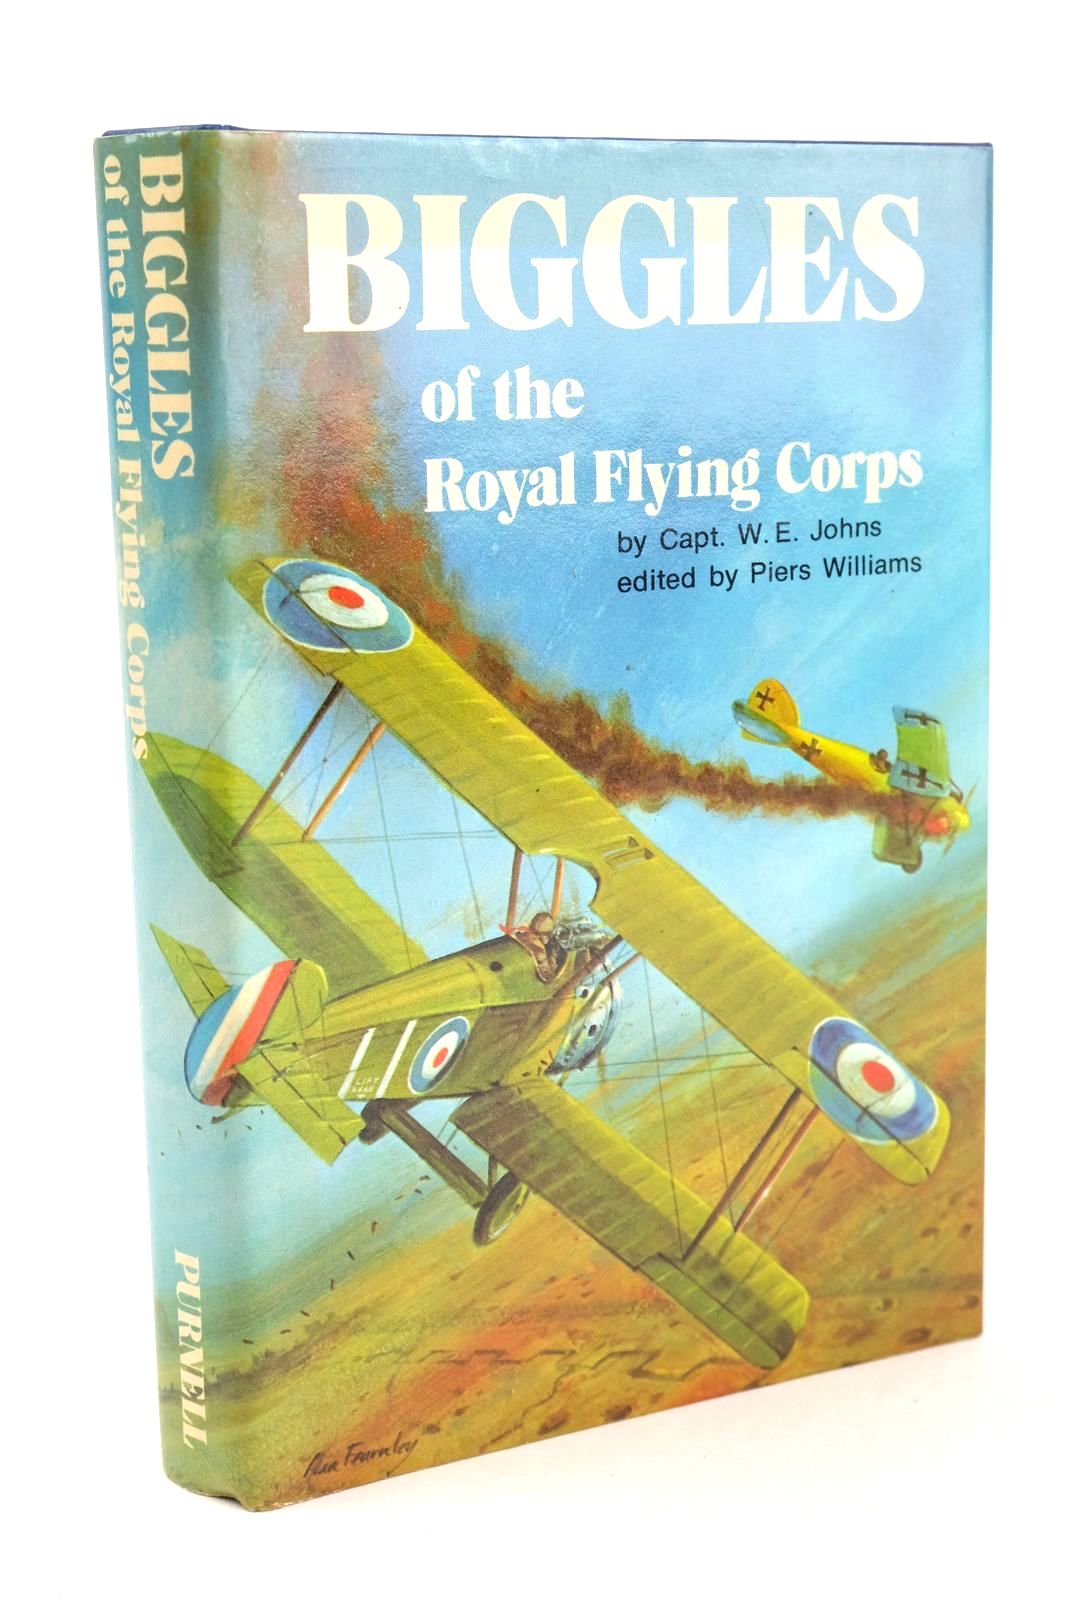 Photo of BIGGLES OF THE ROYAL FLYING CORPS written by Johns, W.E. published by Purnell Books (STOCK CODE: 1326028)  for sale by Stella & Rose's Books